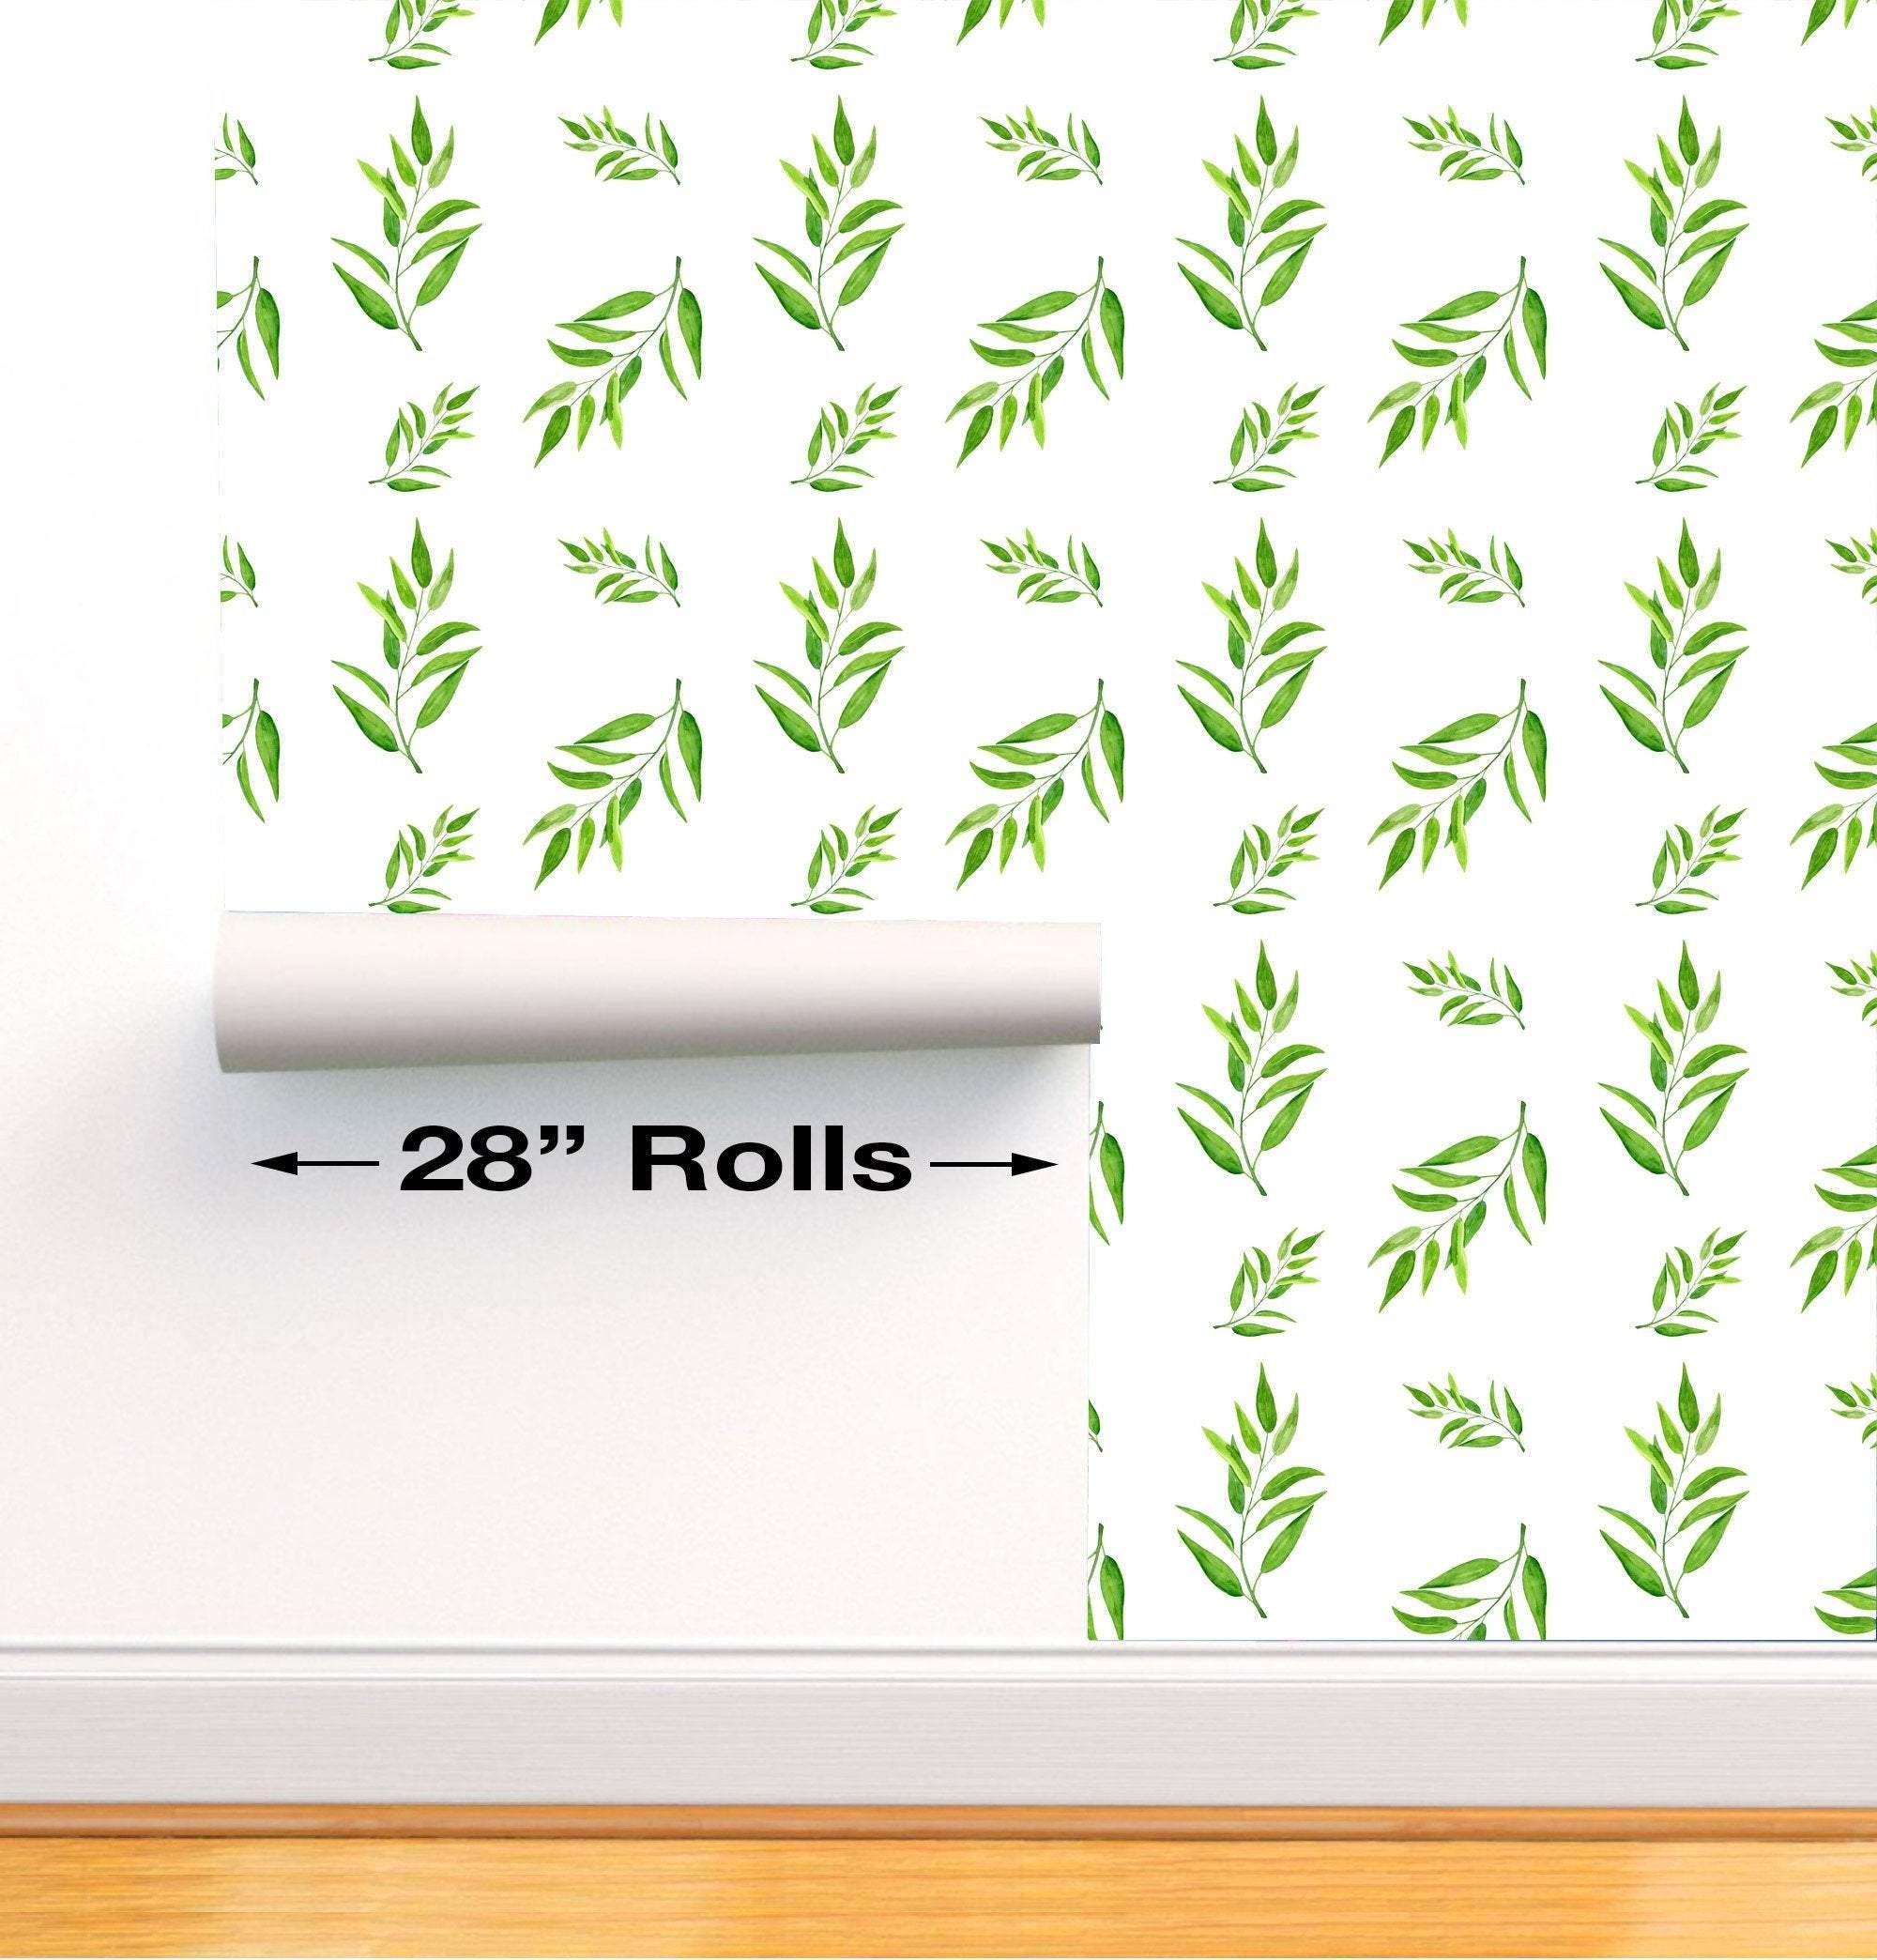 Wallpaper Pattern of green leaves | Removable Wallpaper | Peel-N-Stick | Seamless Pattern | Removable Fabric